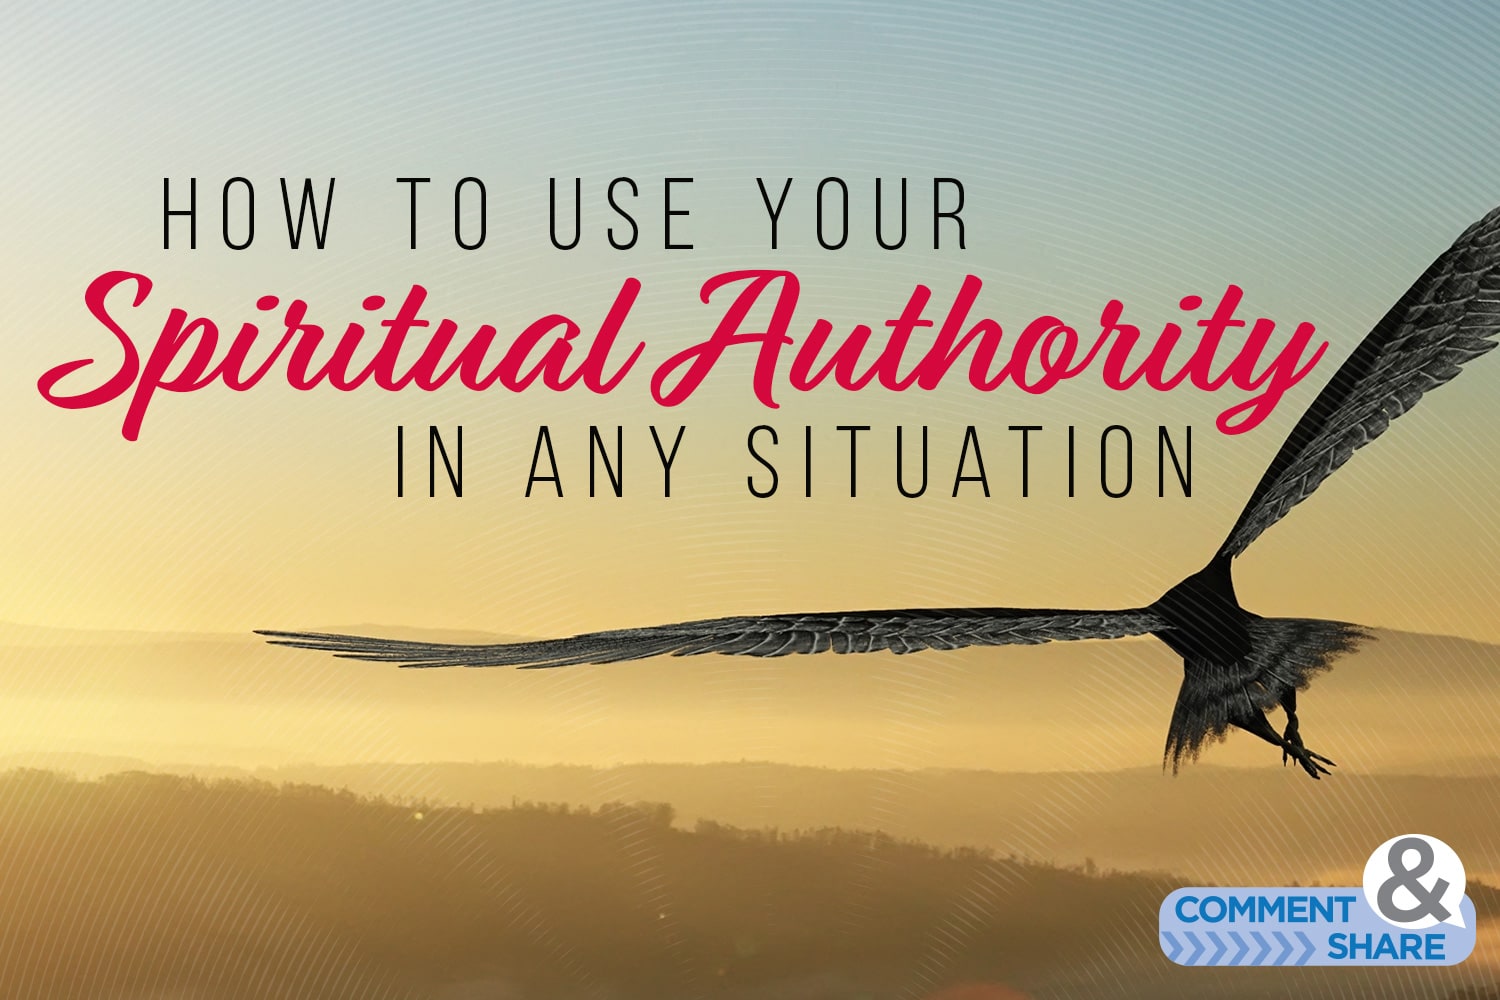 How to Use Your Spiritual Authority in Any Situation